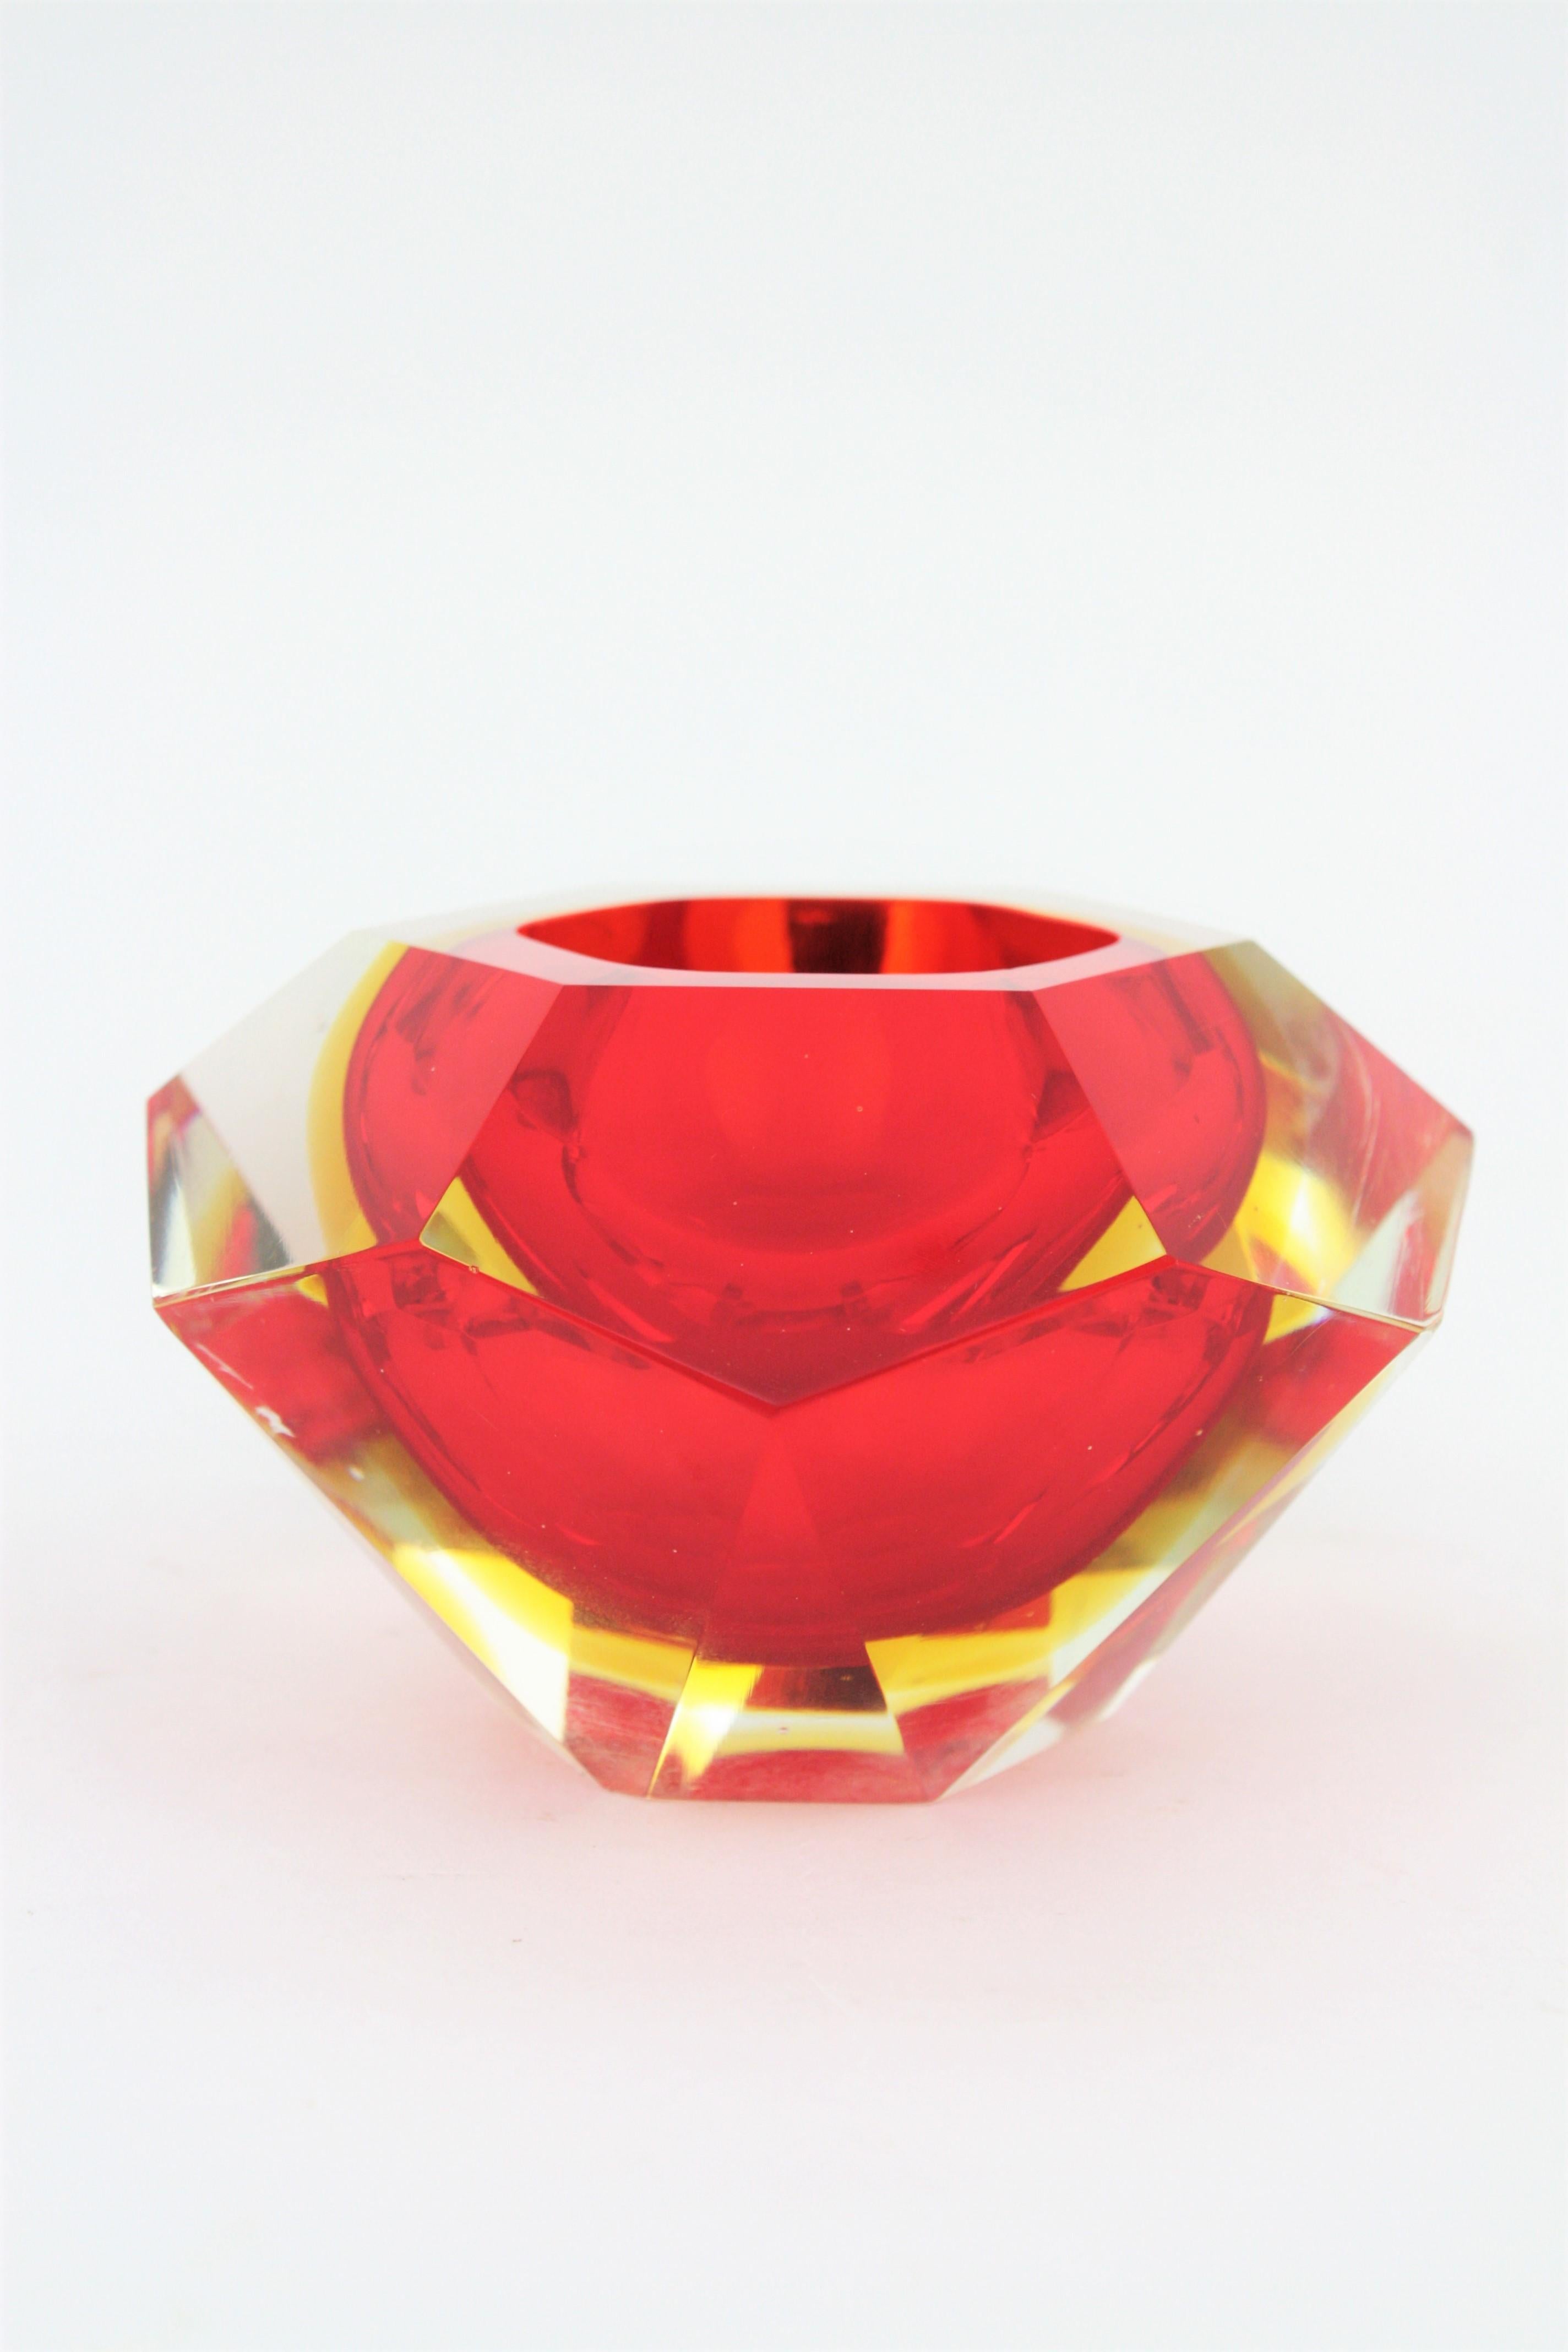 Flavio Poli Murano Red, Yellow and Clear Faceted Glass Diamond Bowl or Ashtray For Sale 3